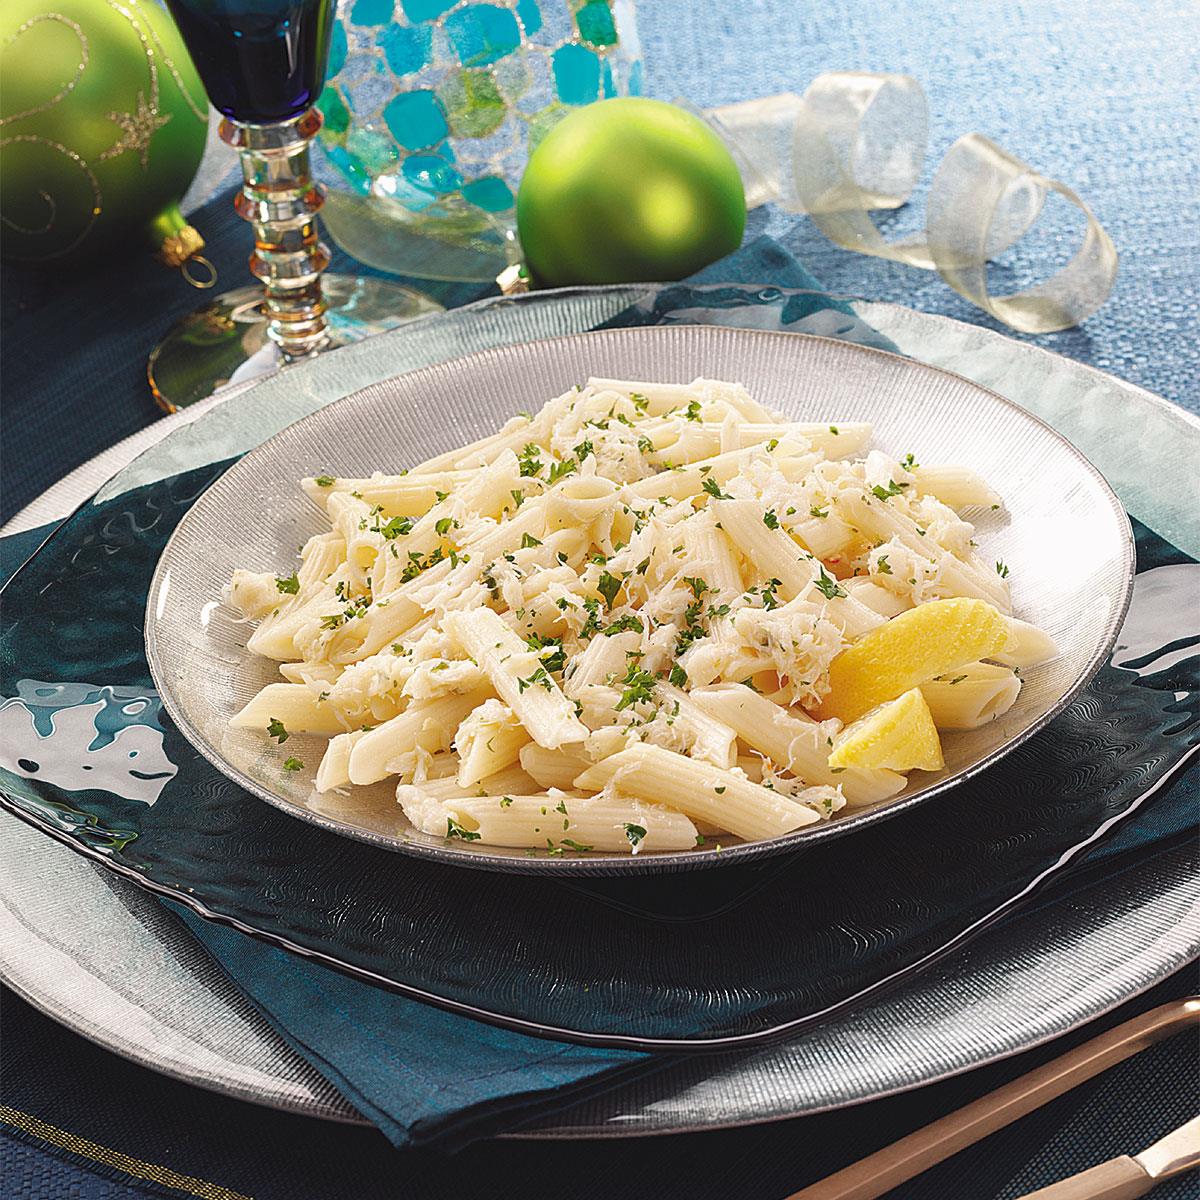 Lemon-Garlic Penne with Crab Recipe: How to Make It